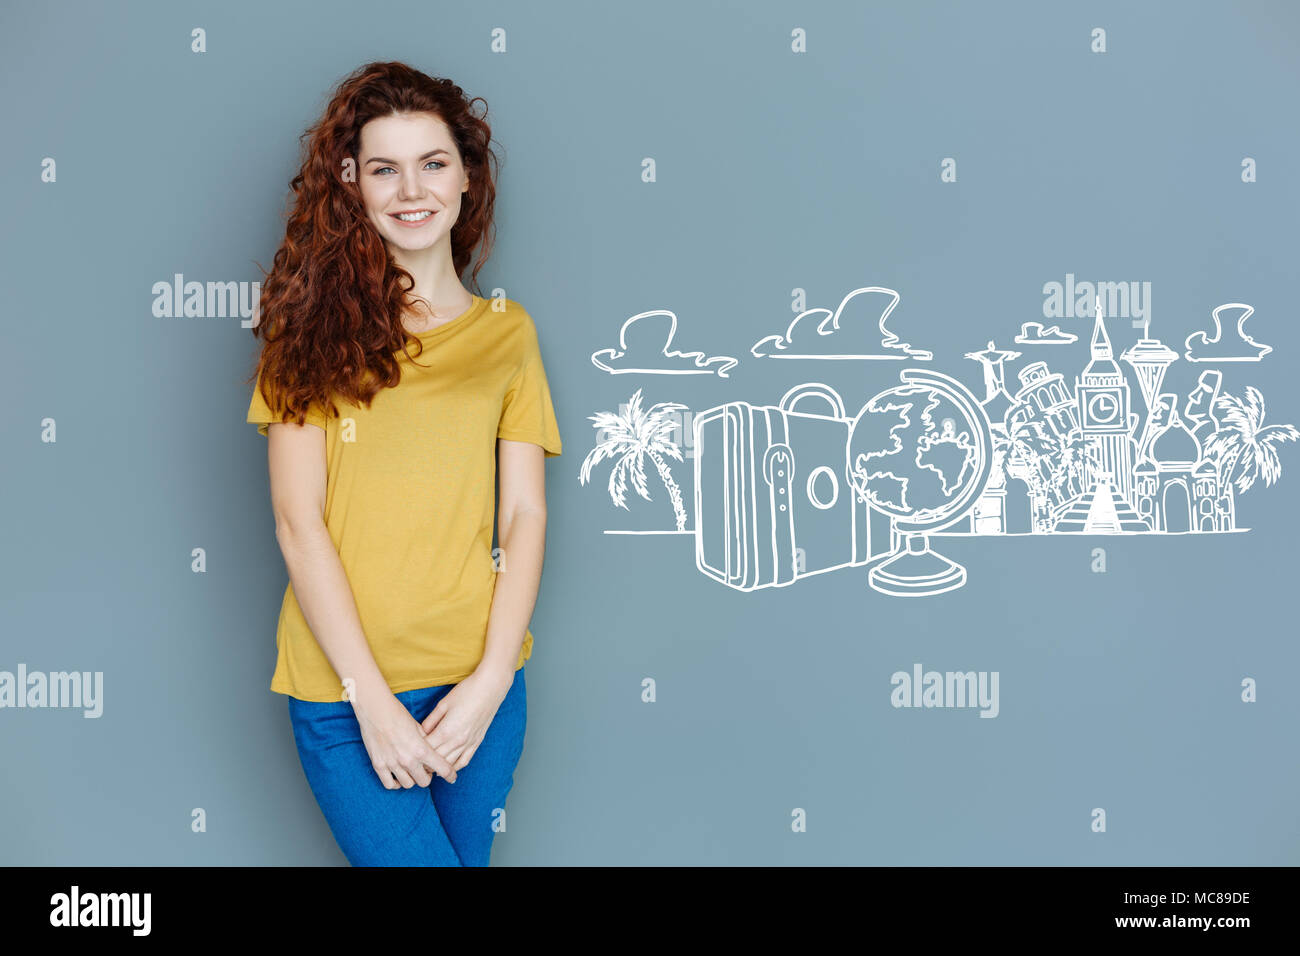 Smiling student waiting for travelling abroad and smiling Stock Photo